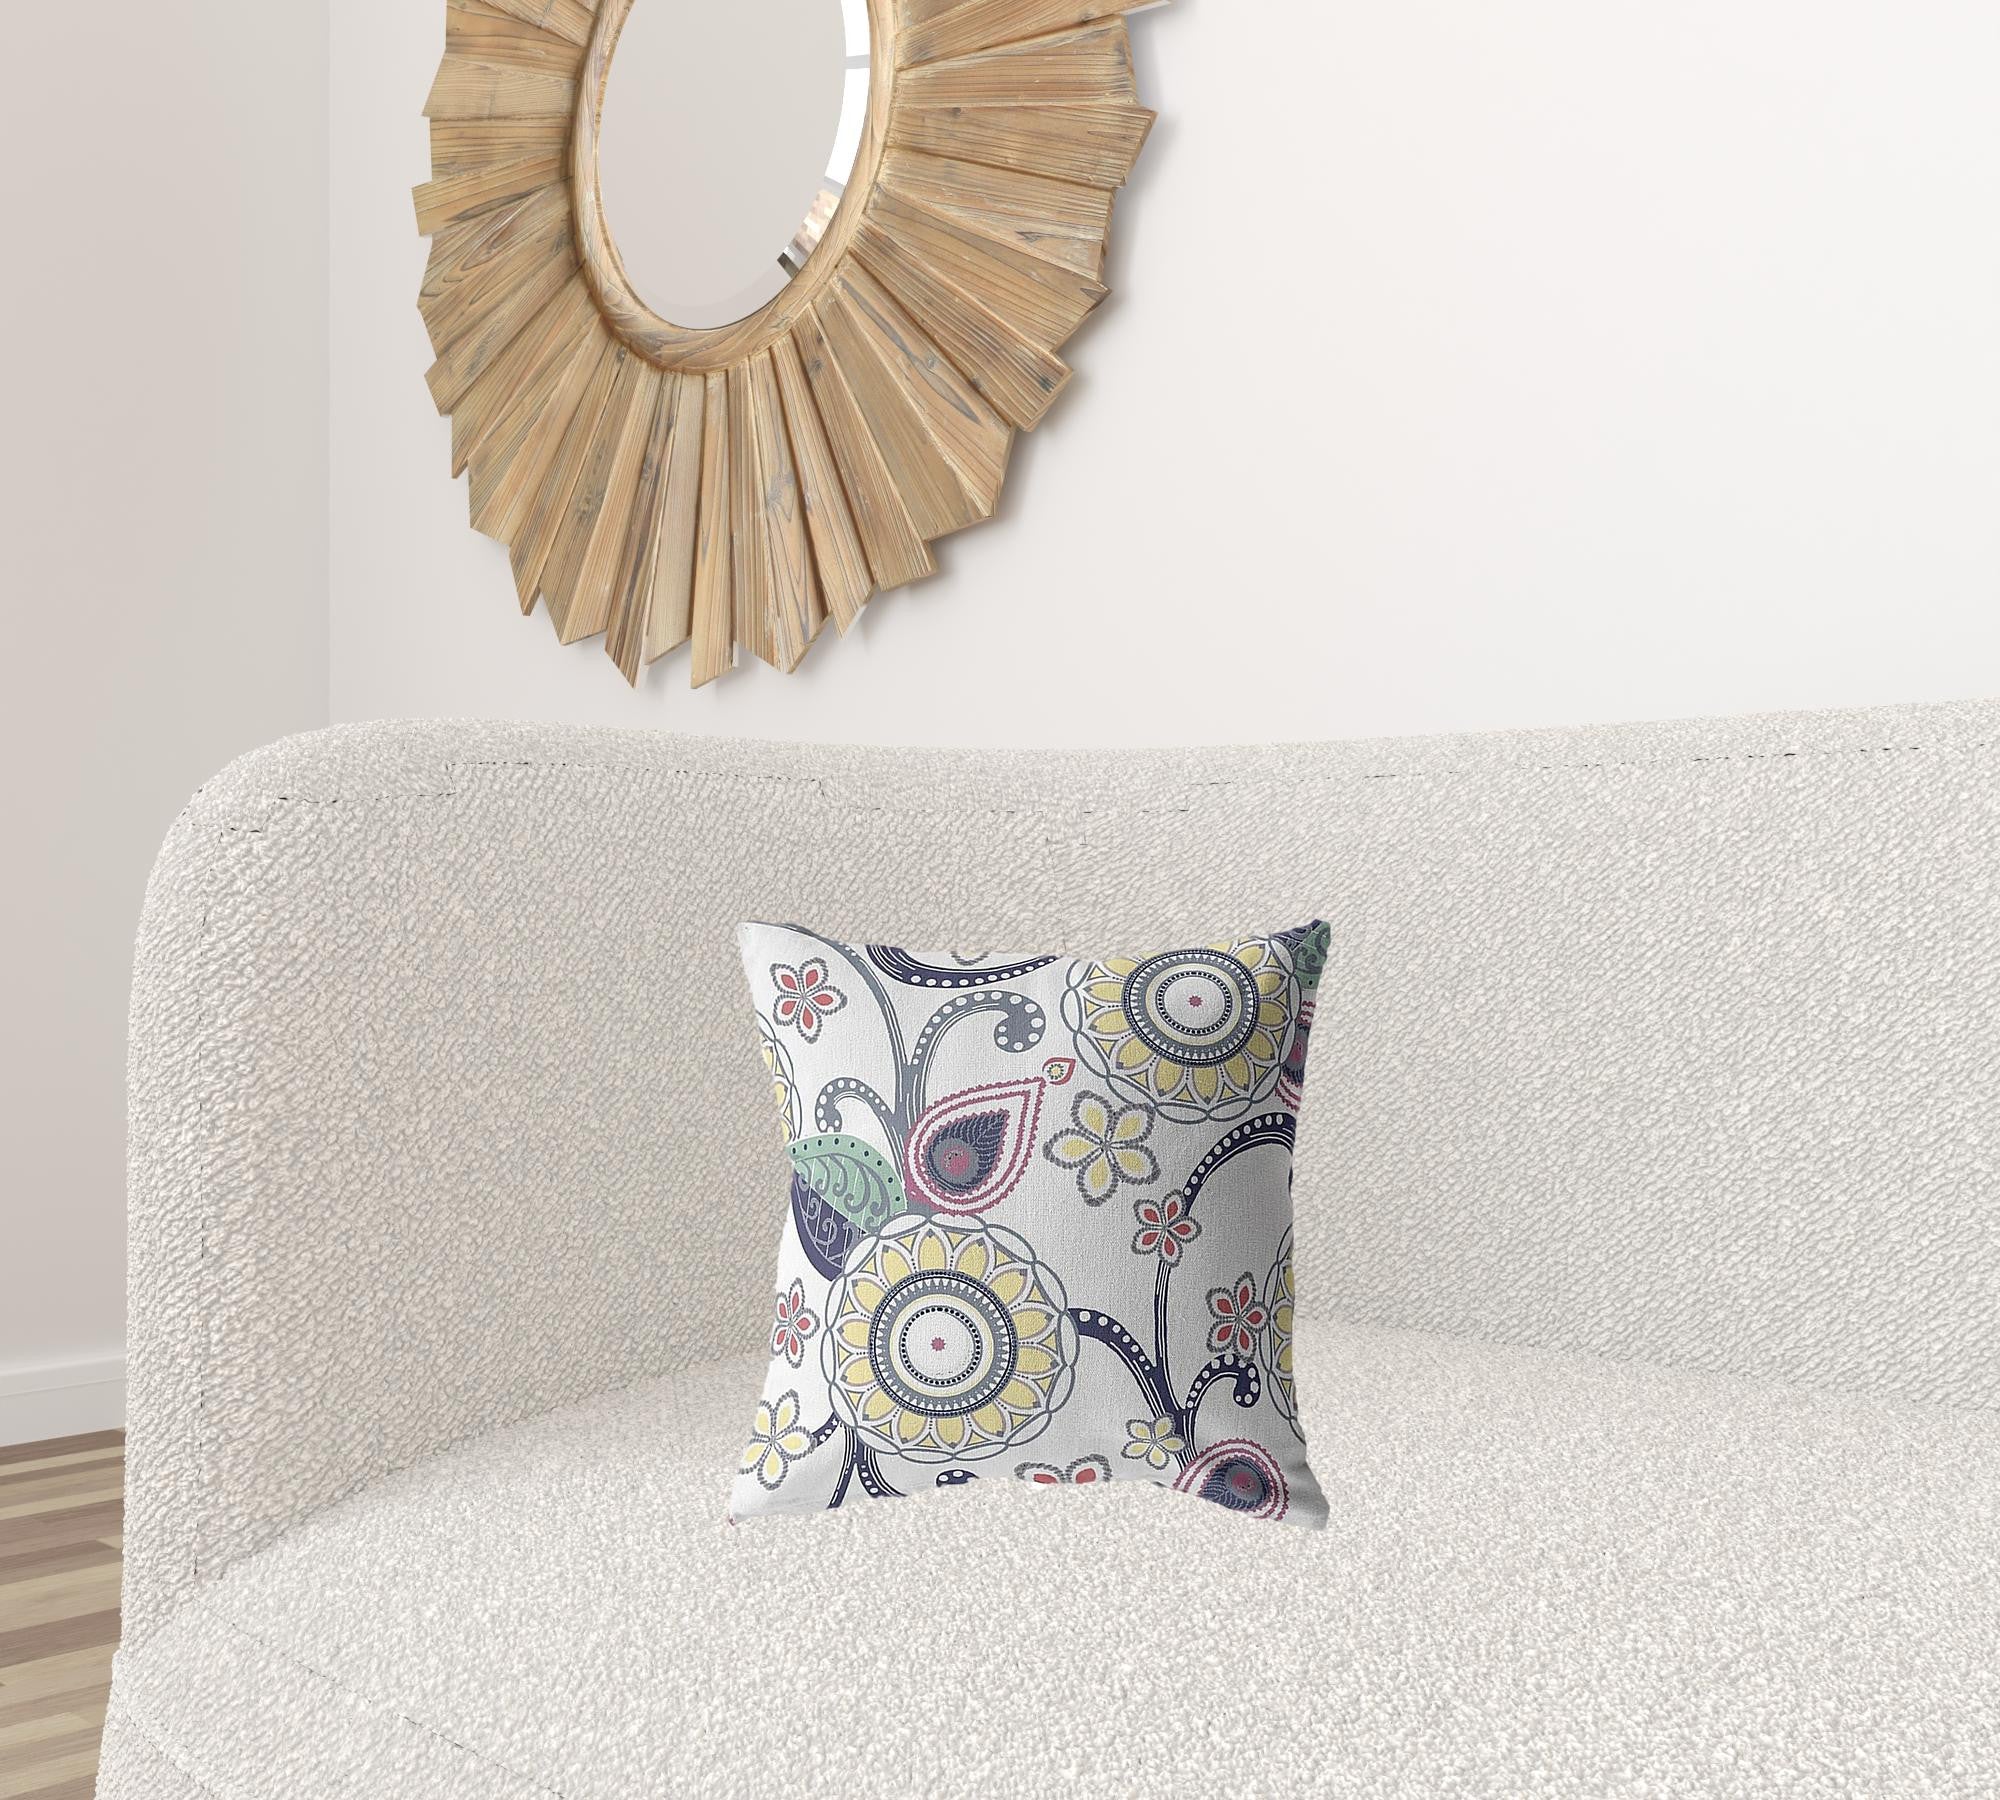 16” White Yellow Floral Suede Throw Pillow